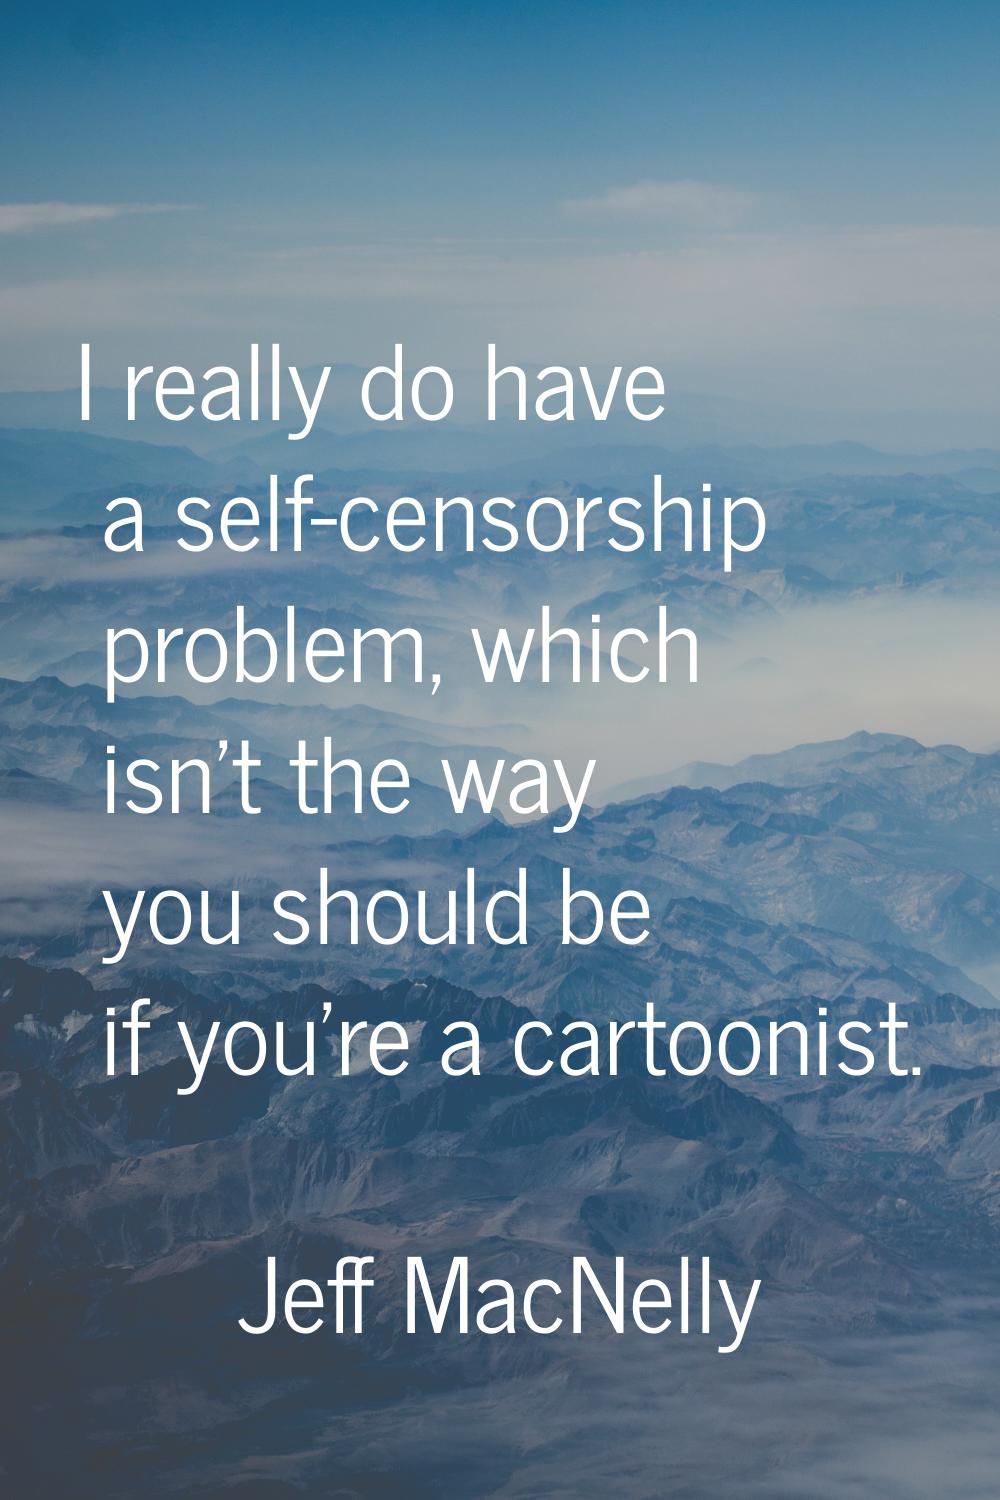 I really do have a self-censorship problem, which isn't the way you should be if you're a cartoonis